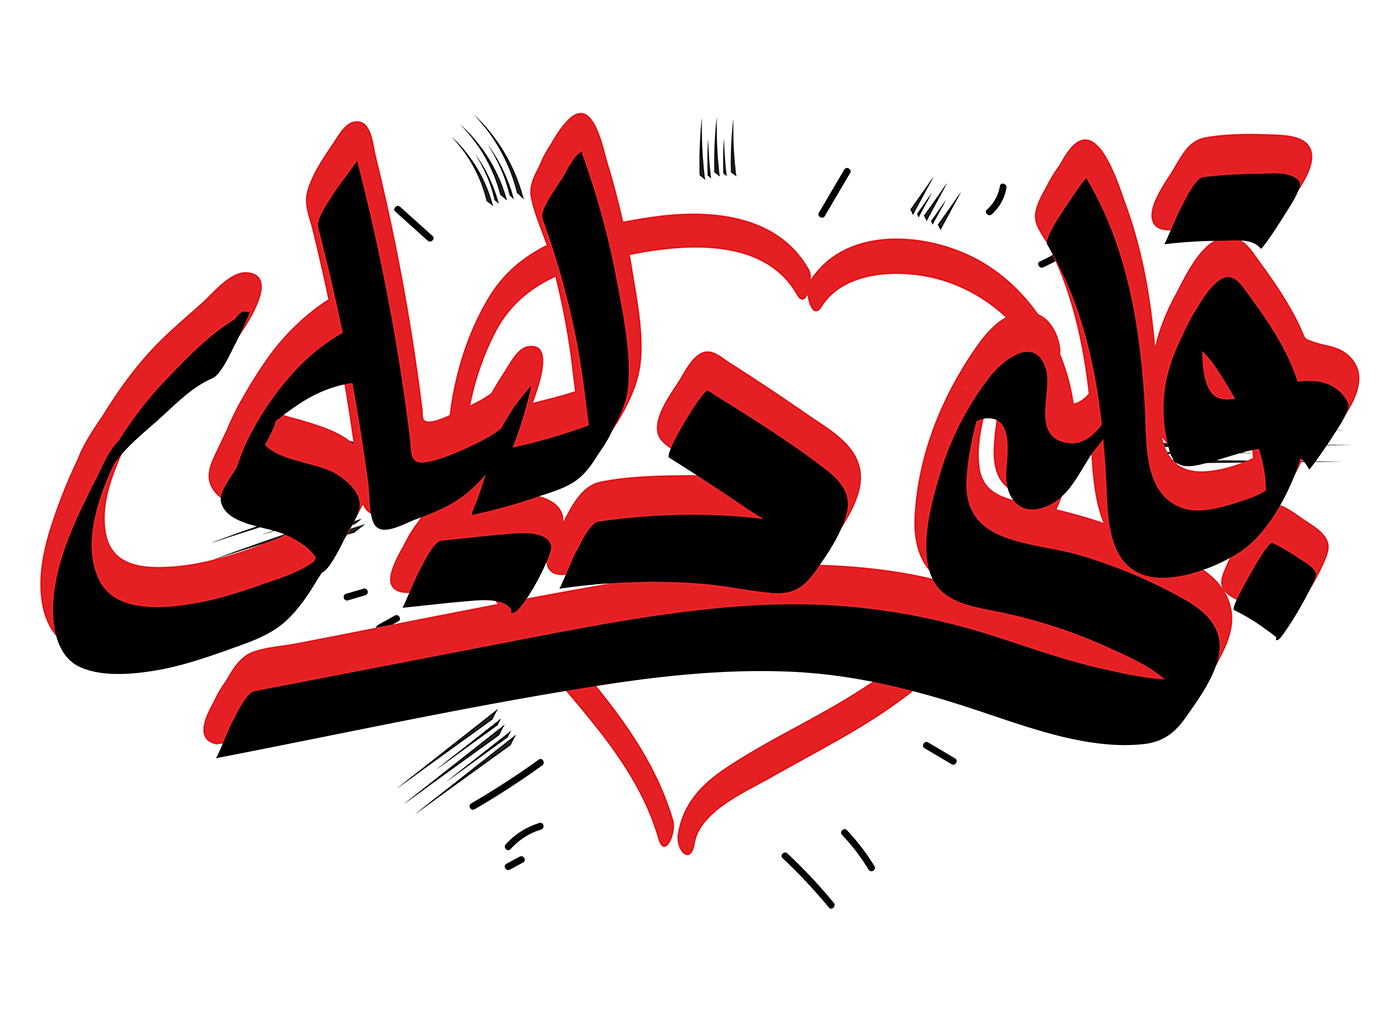 Egyptian Red Letter Logo - ghada wali - Egyptian Lettering Styles in Vintage Movie Posters.